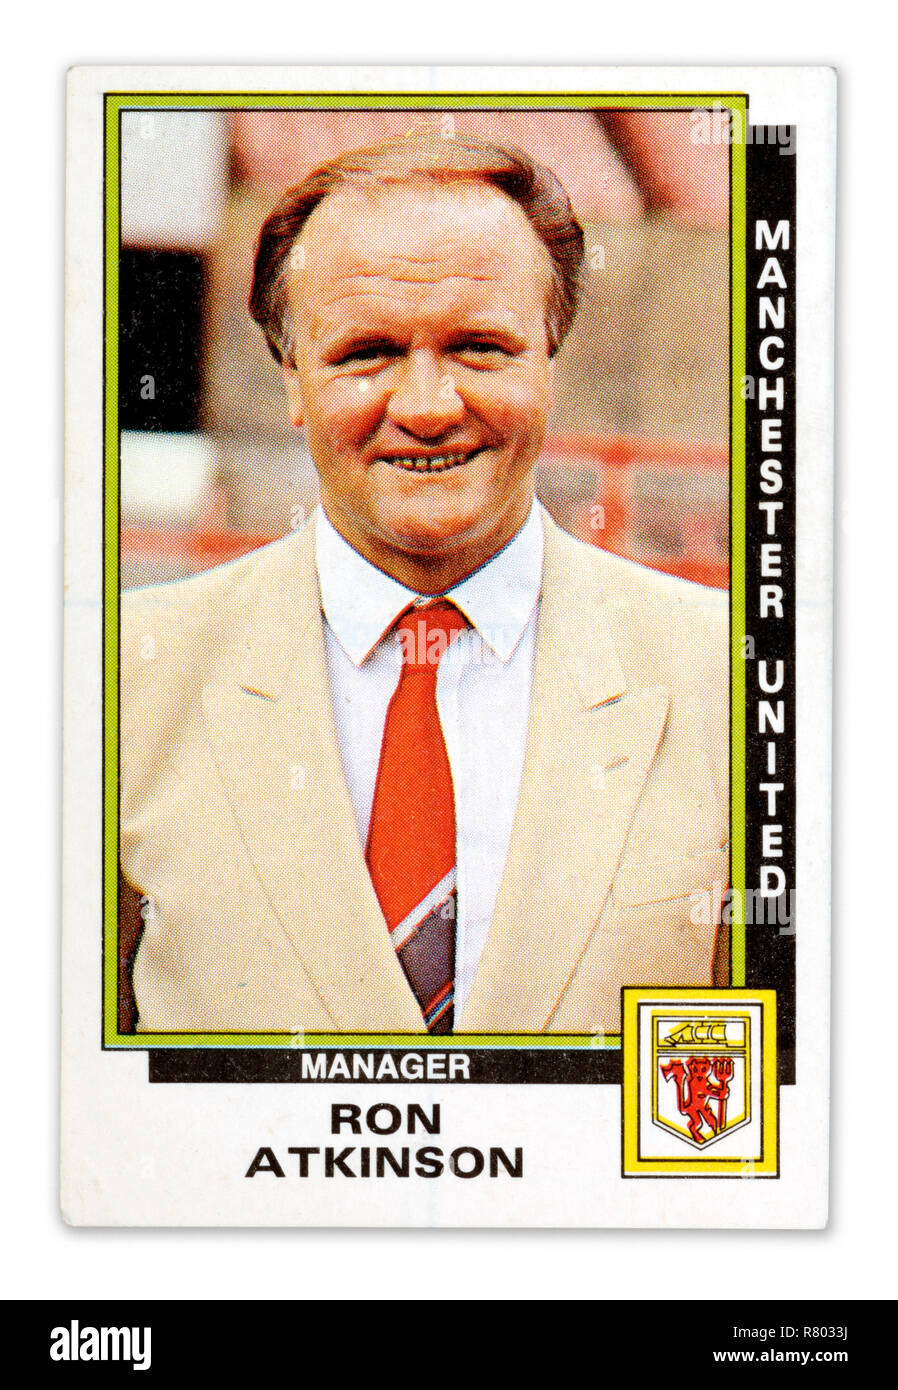 A Panini football player card featuring Ron Atkinson at Manchester United Stock Photo